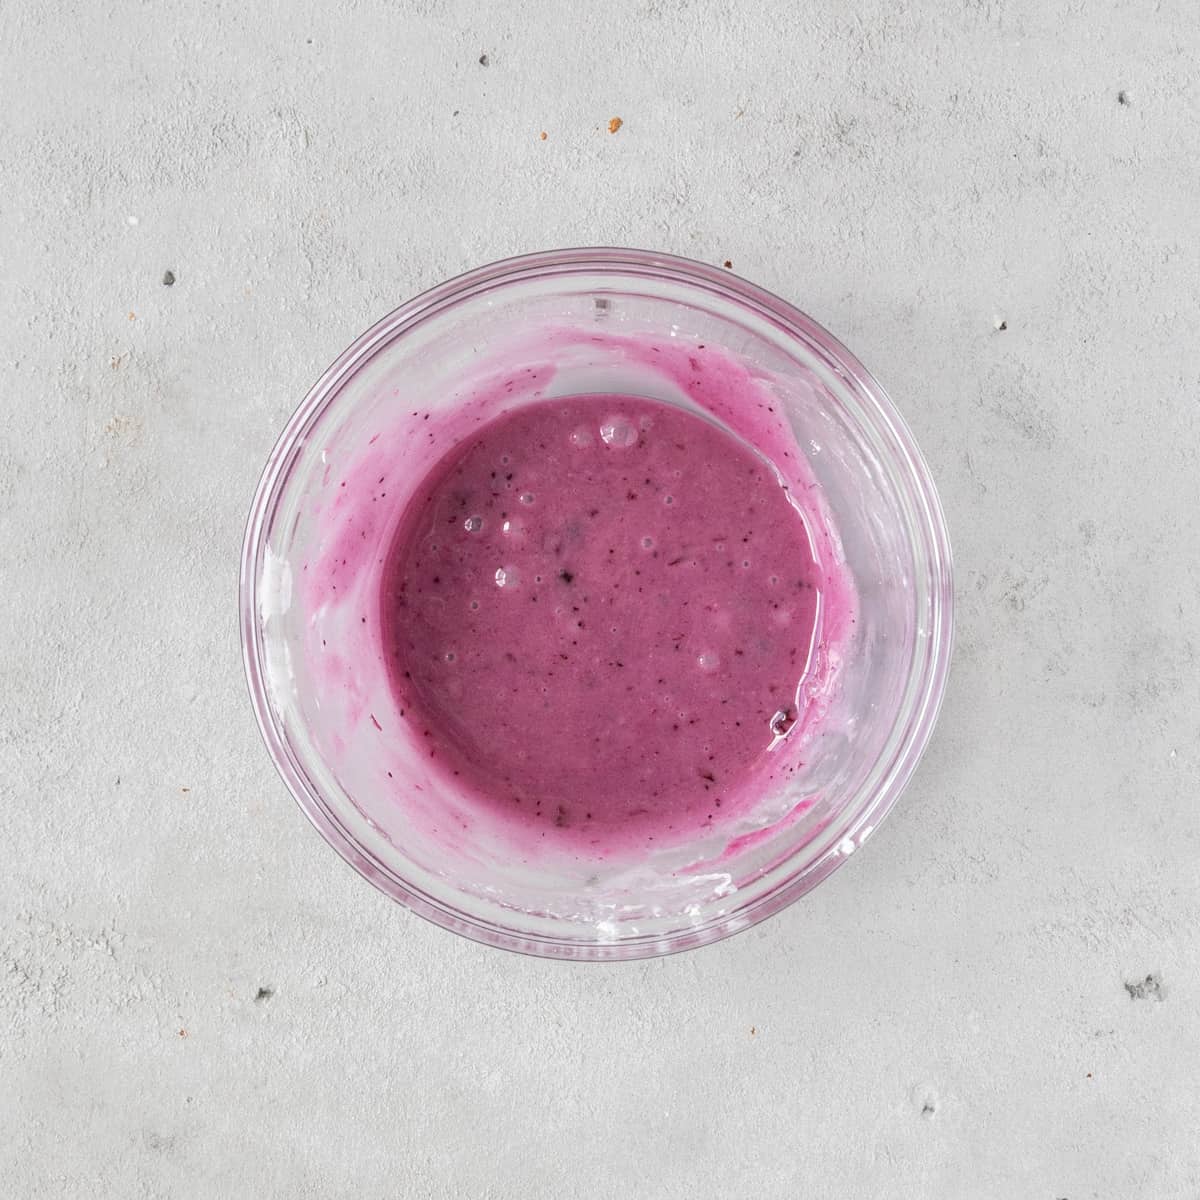 the blueberry glaze in a glass bowl on a grey background.